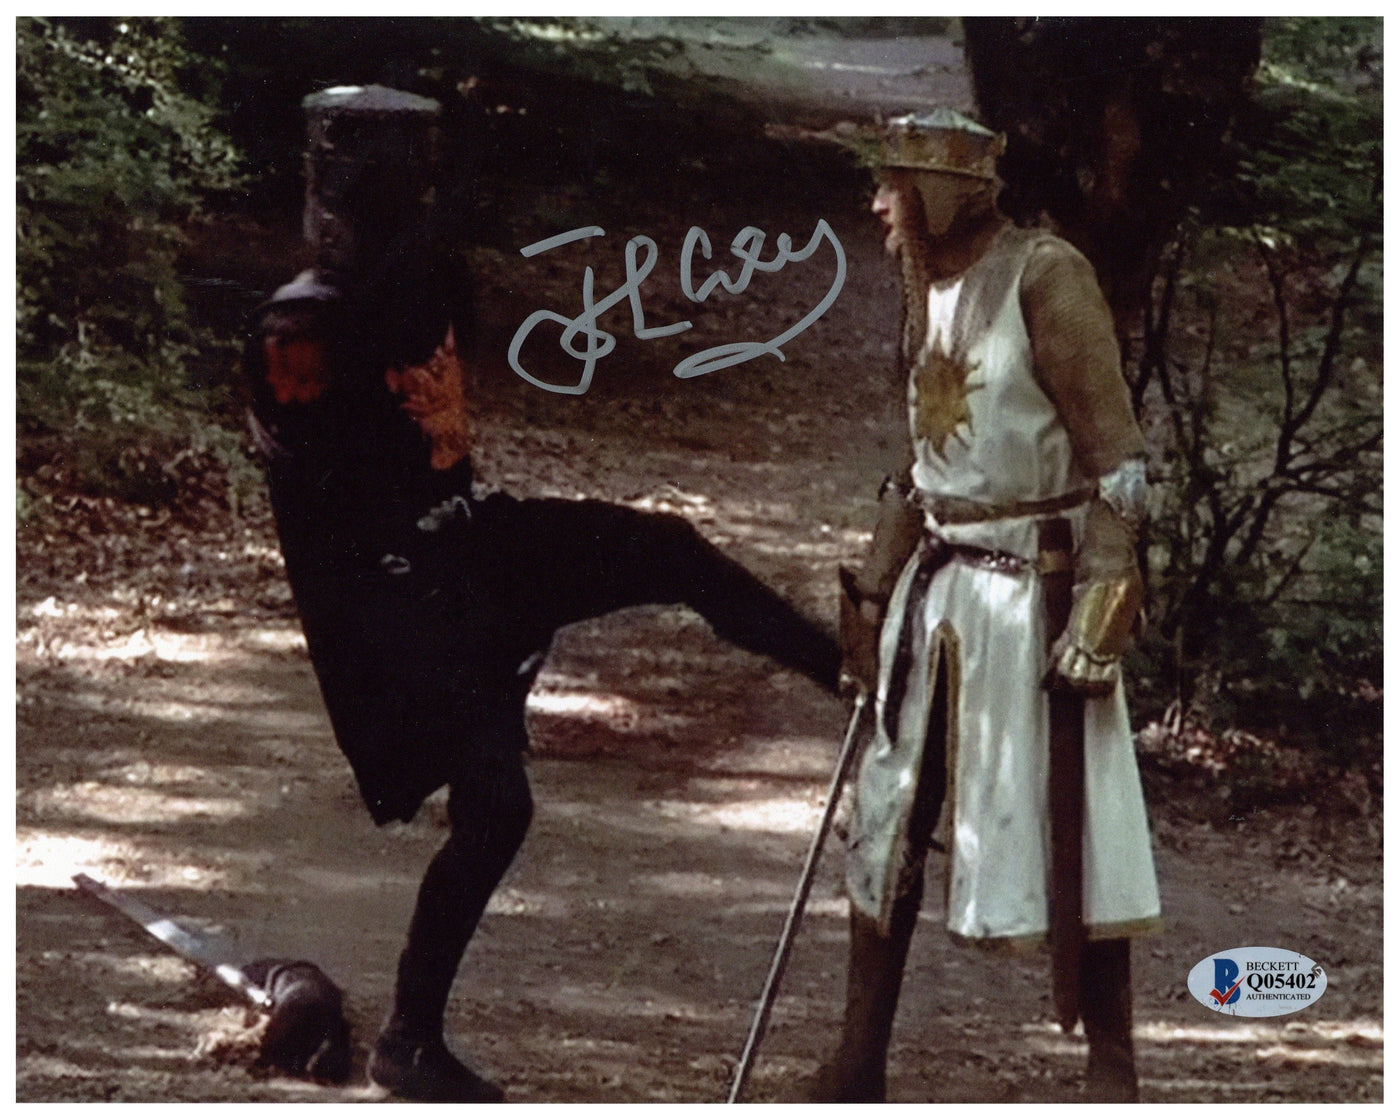 John Cleese Signed 8x10 Photo Monty Python and the Holy Grail Autographed BAS COA